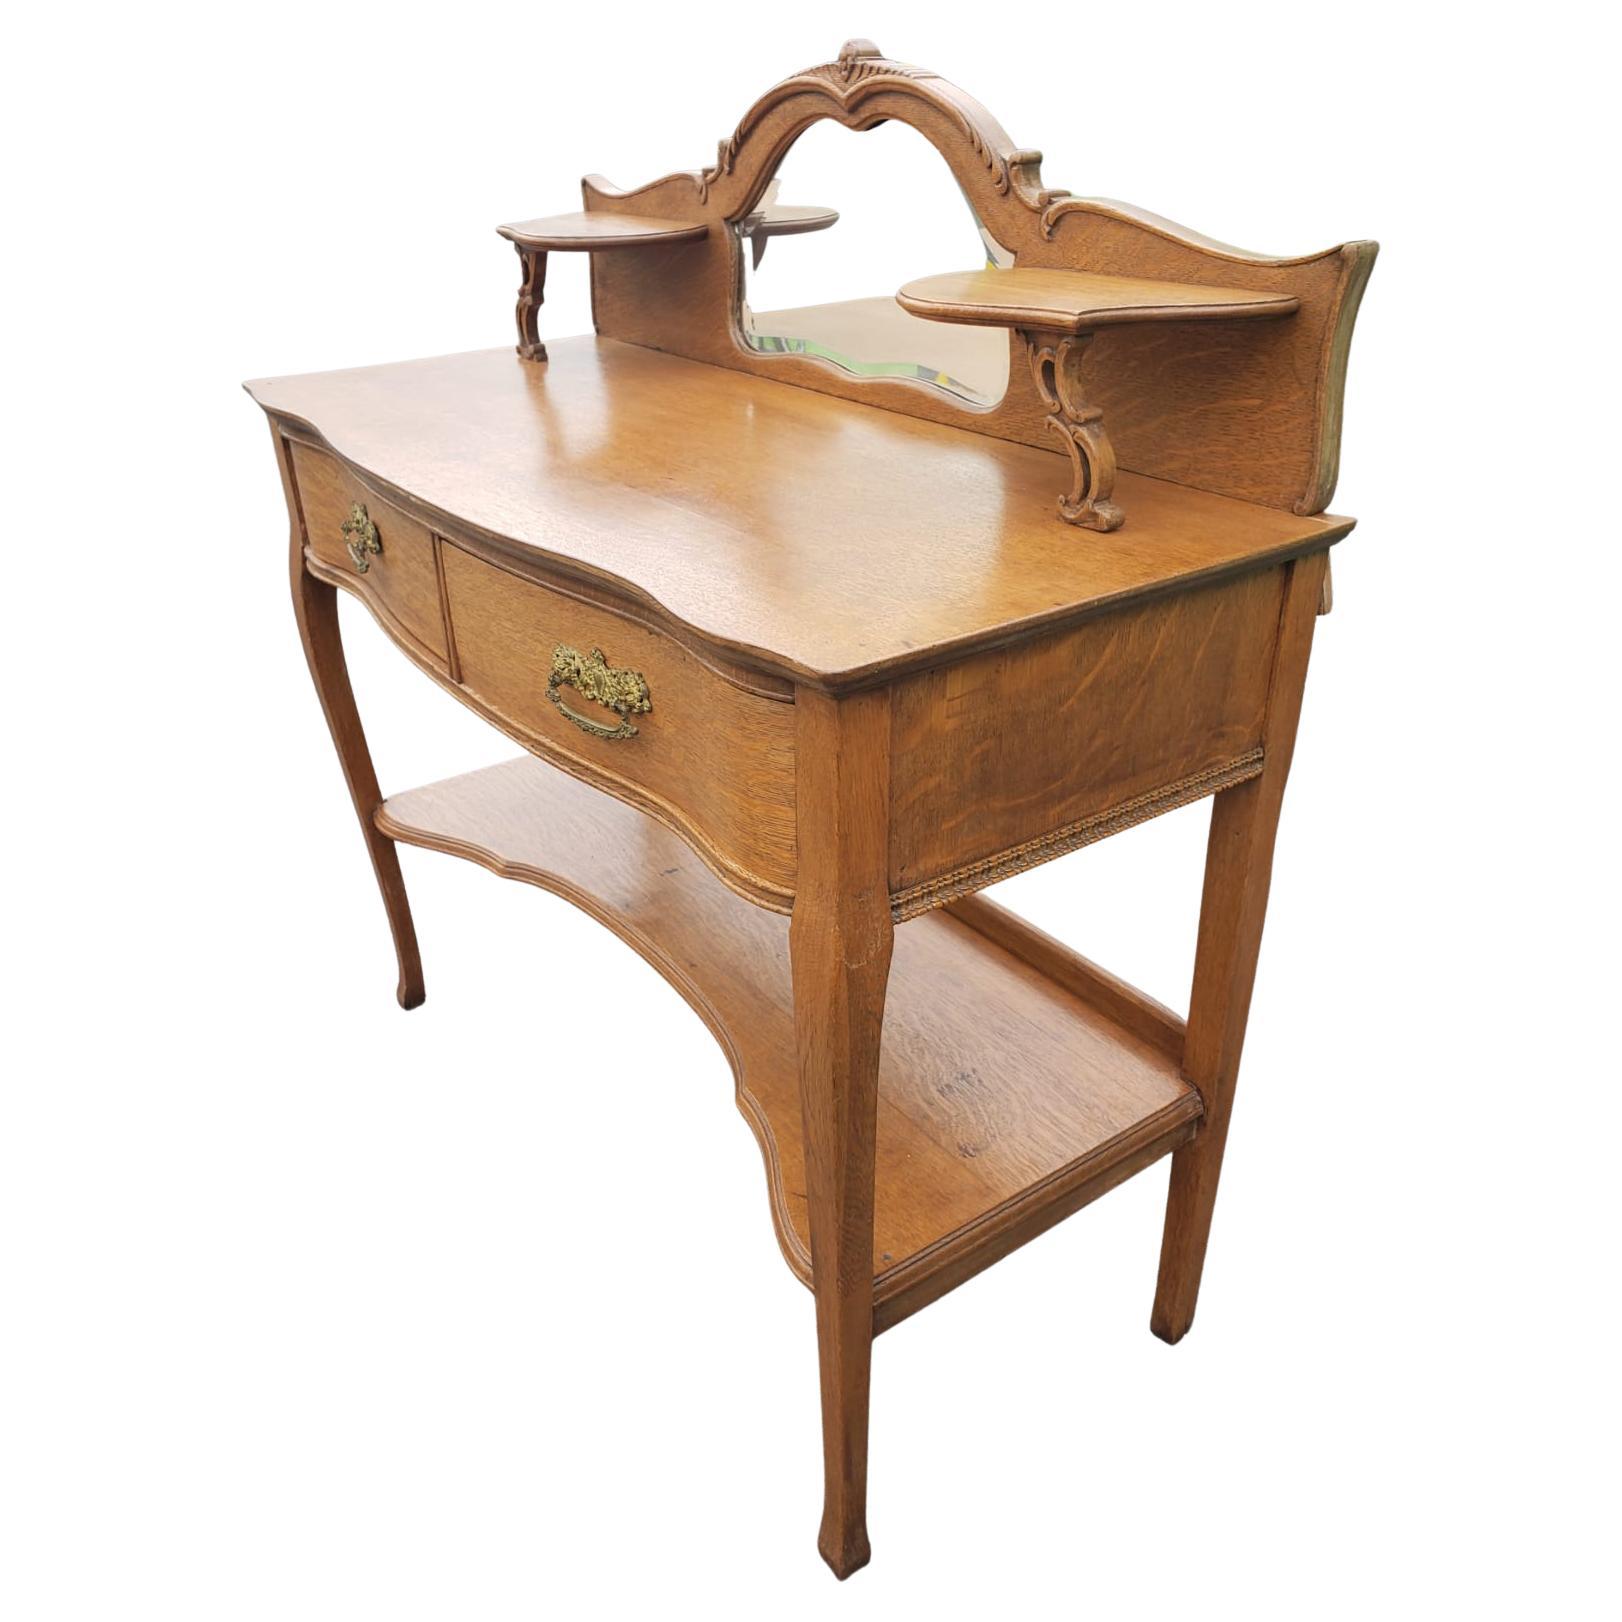 Larkin and Co. antique tier quater sawn oak vanity / dresser with integrated mirror Circa 1930s
Measures 42